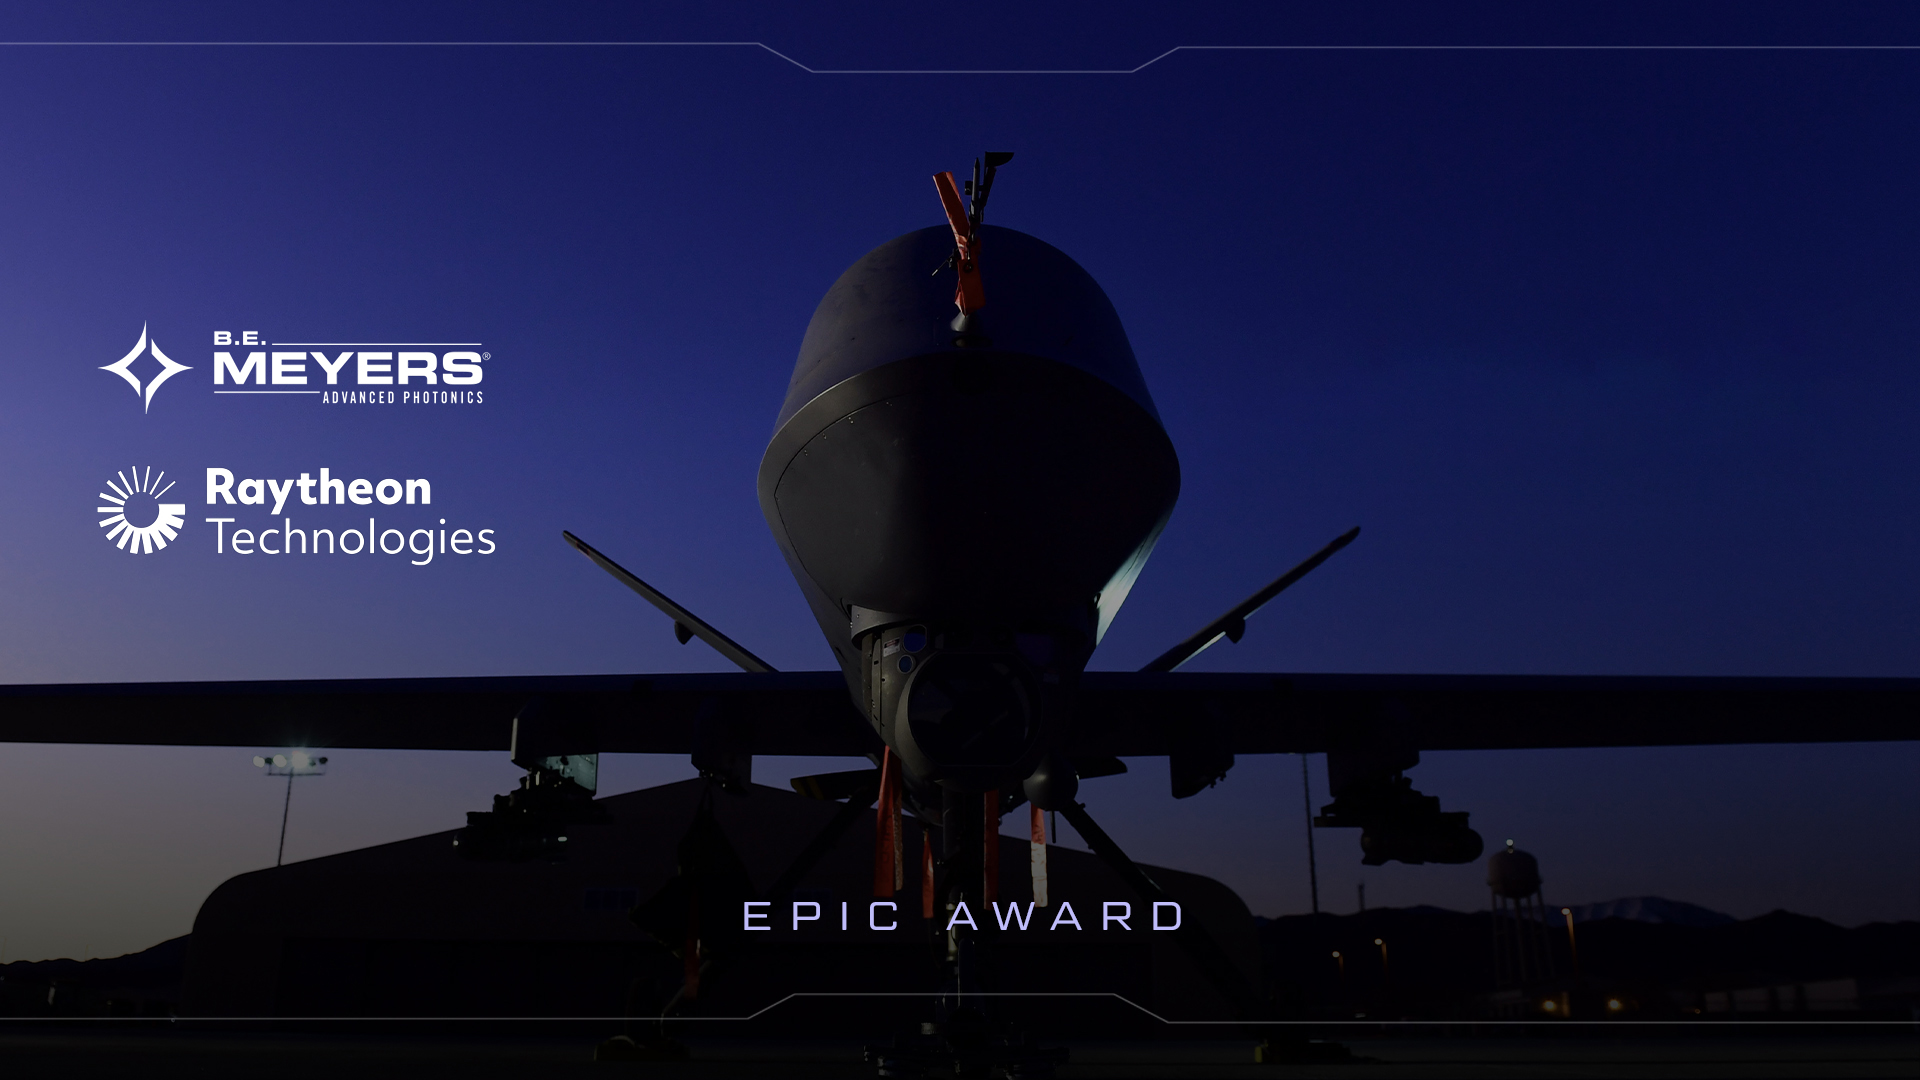 B.E. MEYERS & CO. RECOGNIZED BY RAYTHEON TECHNOLOGIES WITH EPIC AWARD FOR SUPPLIER PERFORMANCE